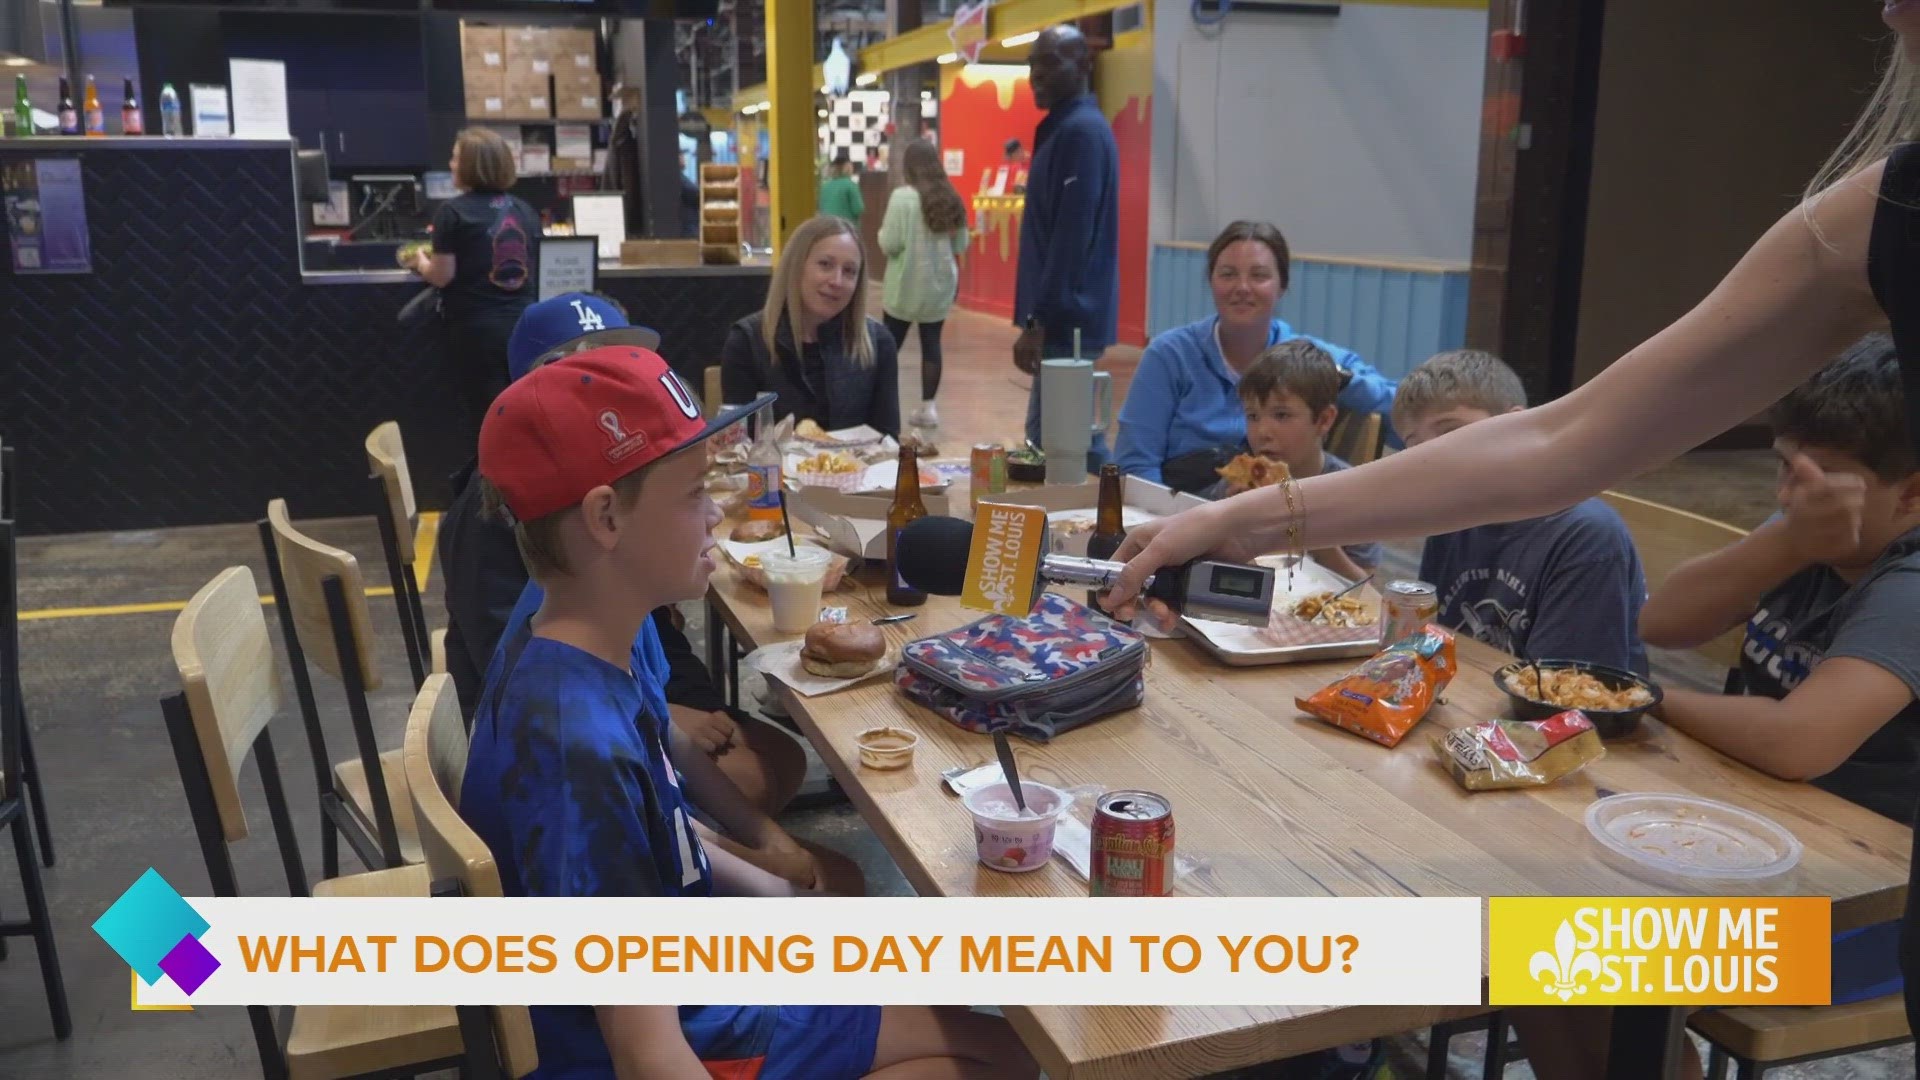 Mary and Dusty went to you, the viewers, to ask what opening day means to you.